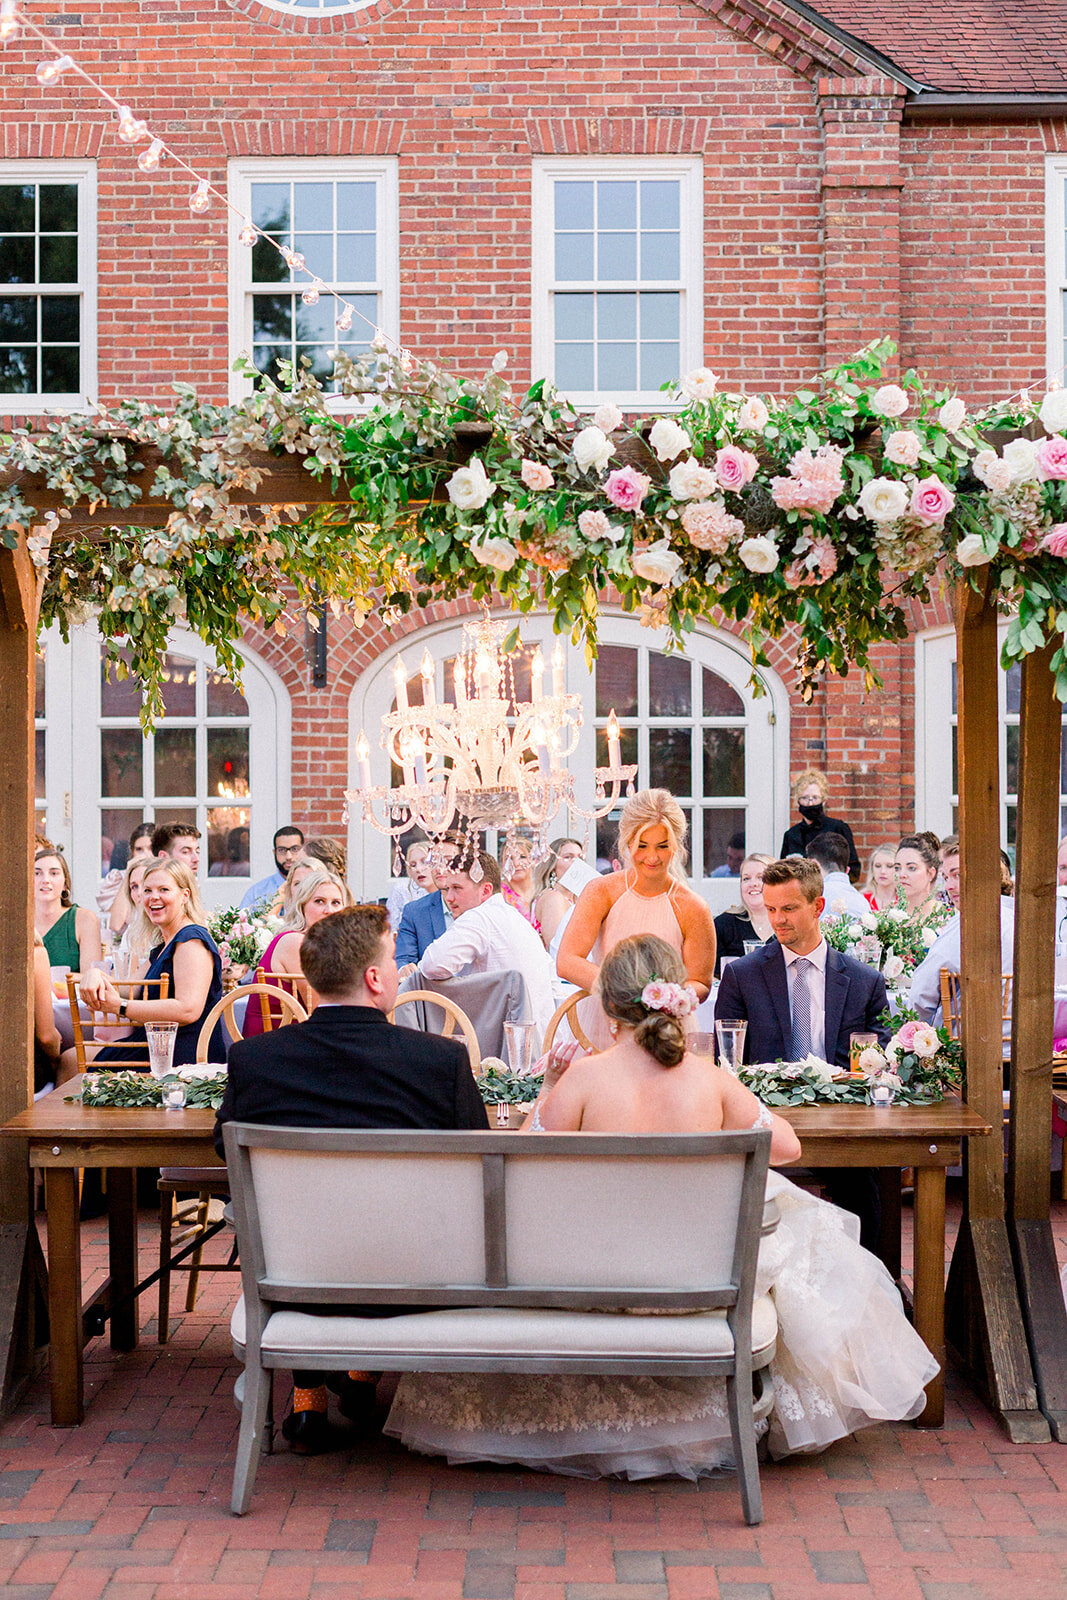 This garden courtyard reception pergola is covered with pink and ivory roses, majolica spray roses, heirloom carnations, assorted hydrangea and  cherry laurel. Designed by Rosemary & Finch in Nashville, TN.